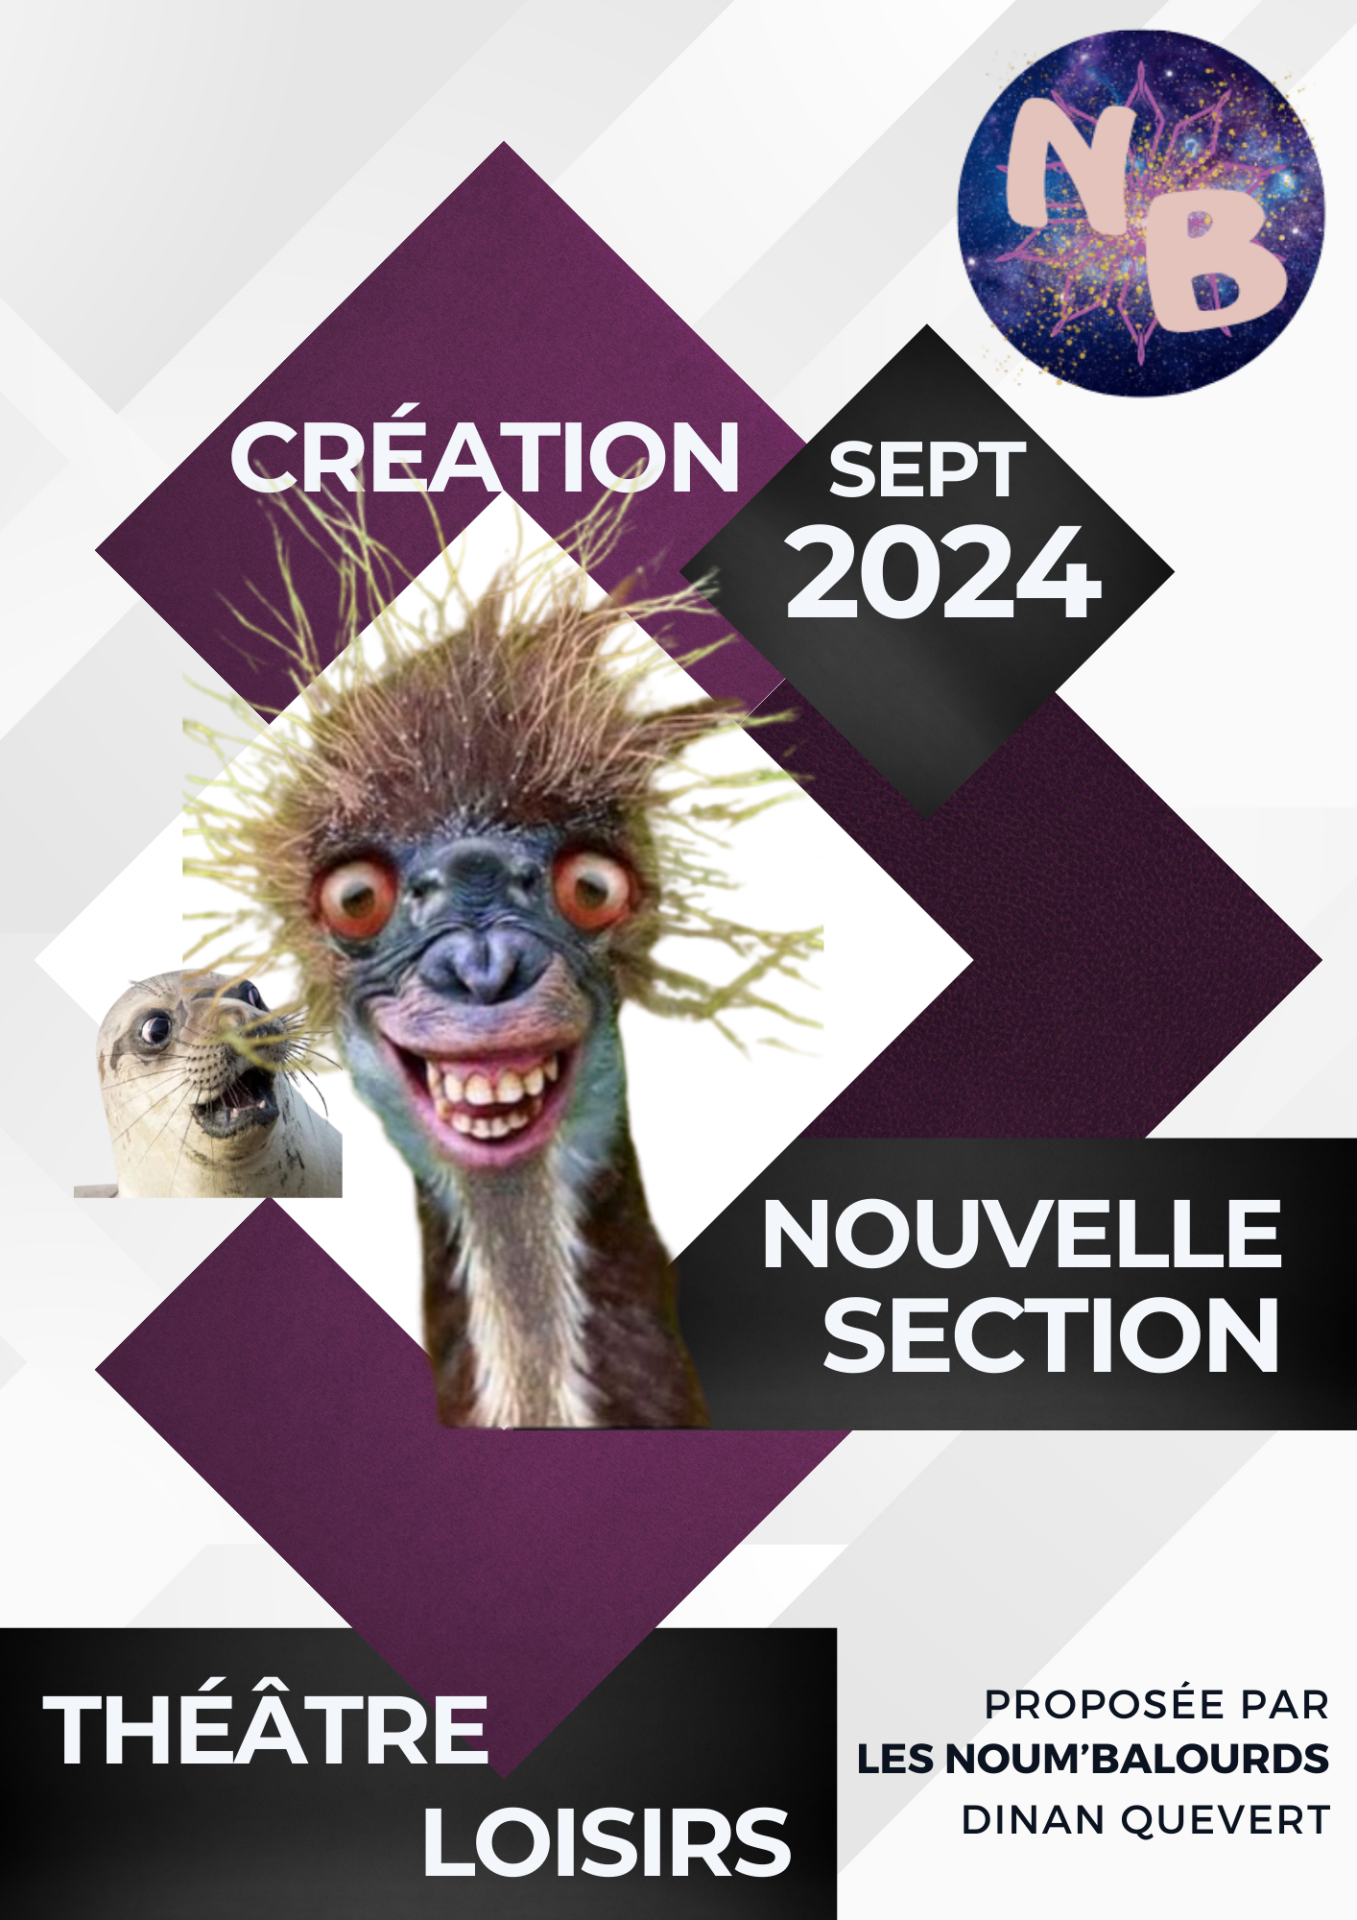 Creation section theatre loisirs sept 2024